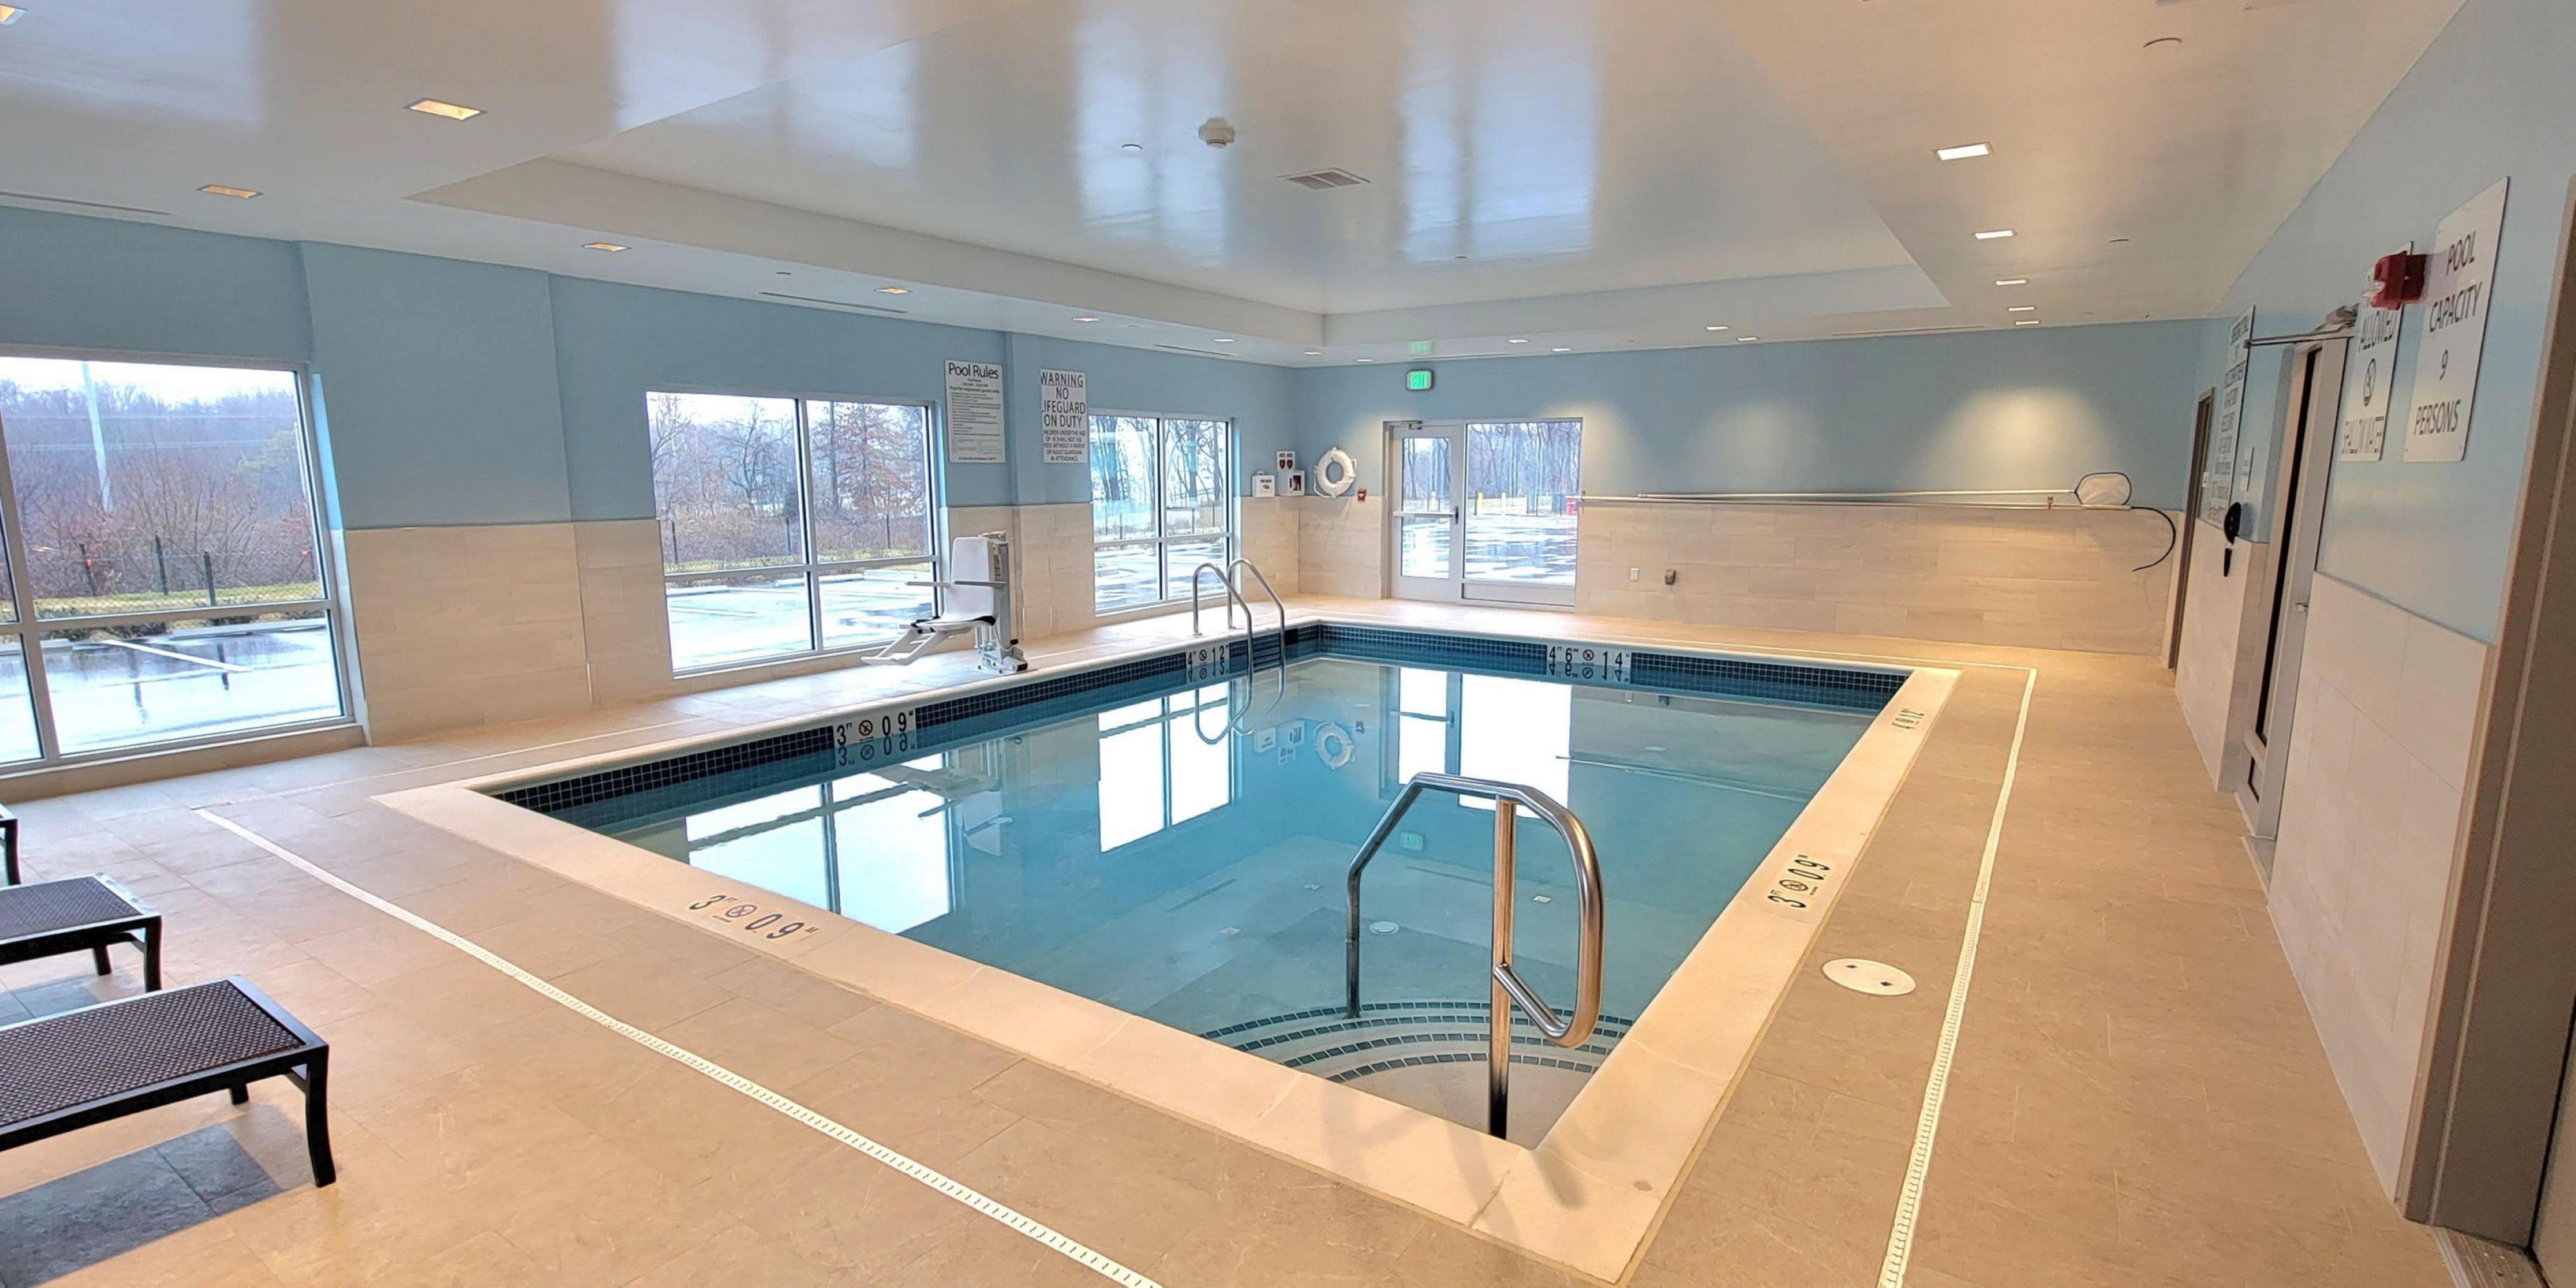 Our hotel offers a Heated indoor pool.